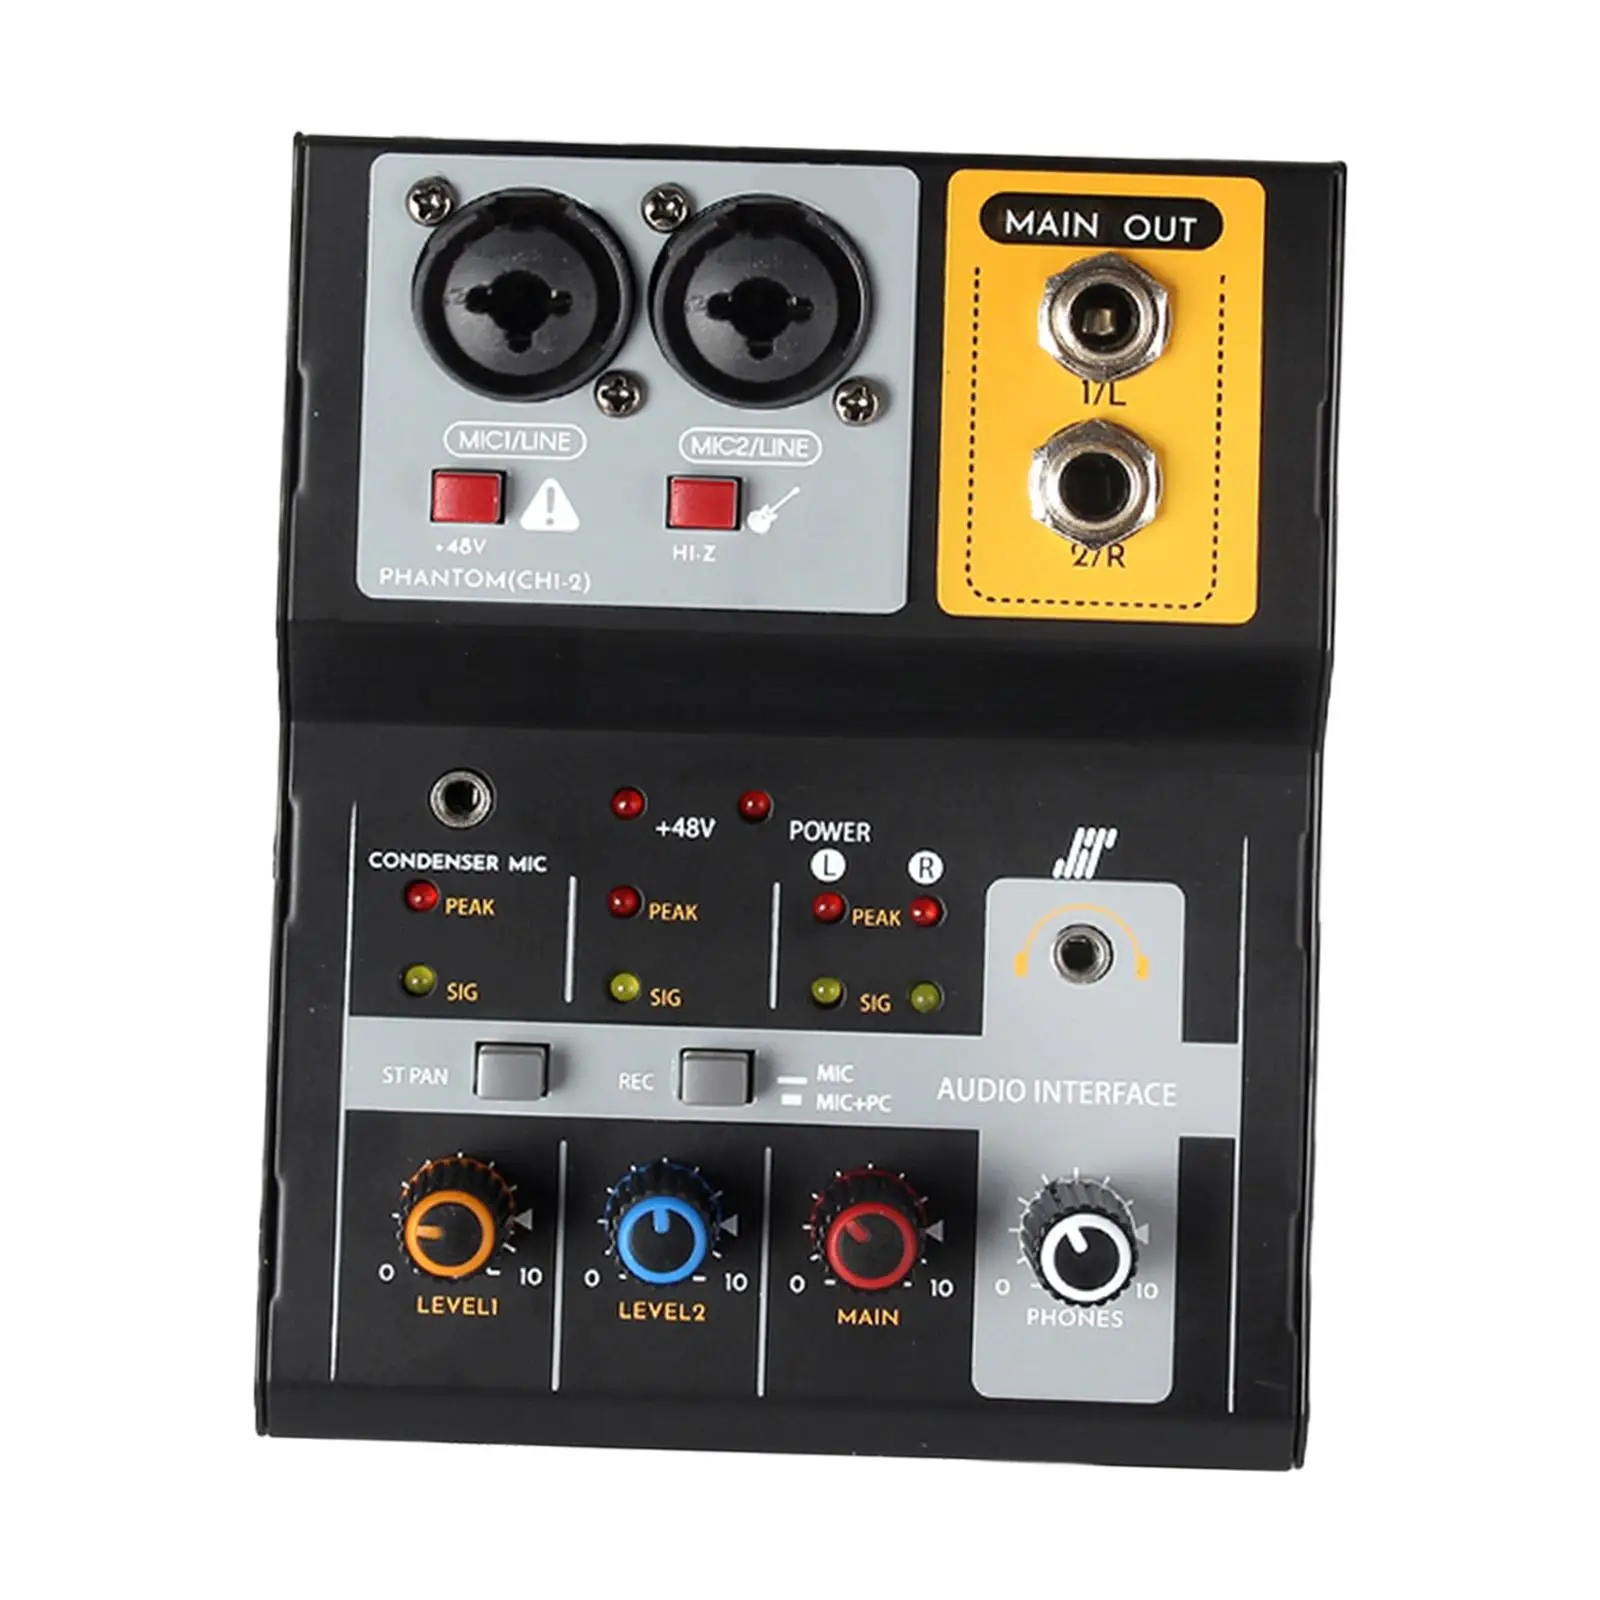 Audio Sound Mixer Stereo USB 48V Less Interference 2 Channel for Live Broadcast KTV Studio Show Podcasting Party Recording